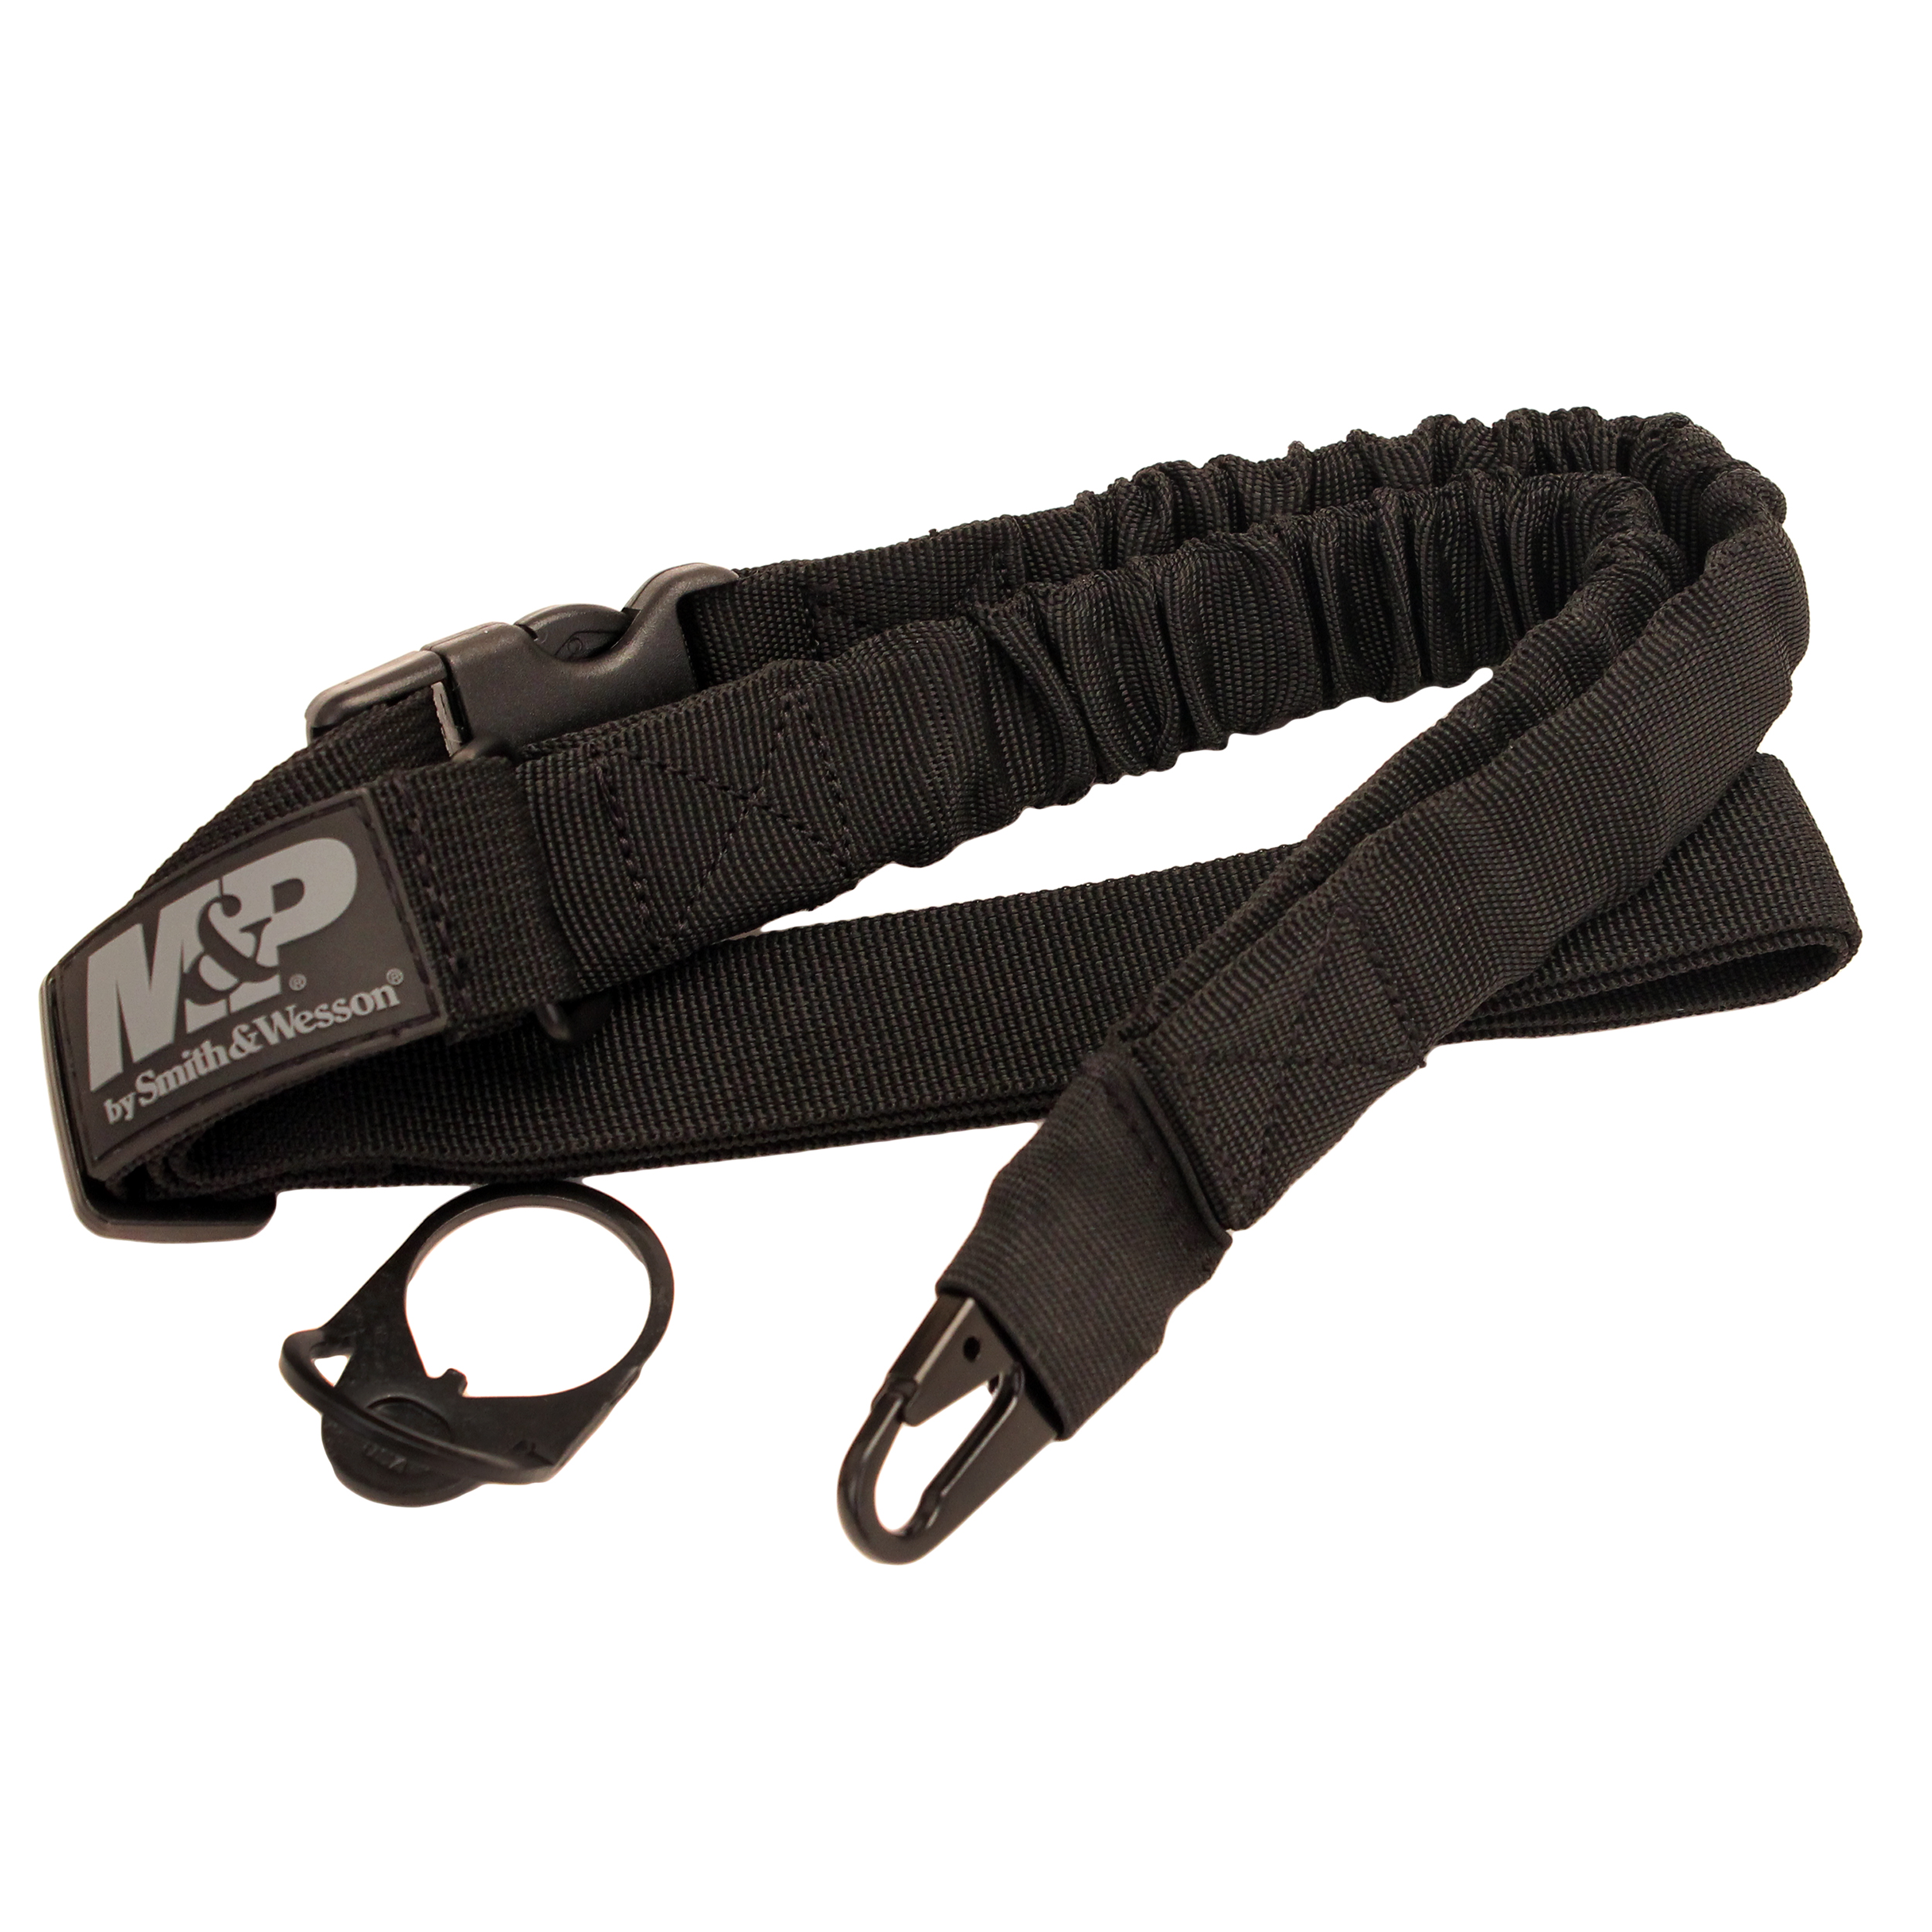 Tactical Single One Point Rifle Sling Strap/Swivel Attachment for Picatinny Rail